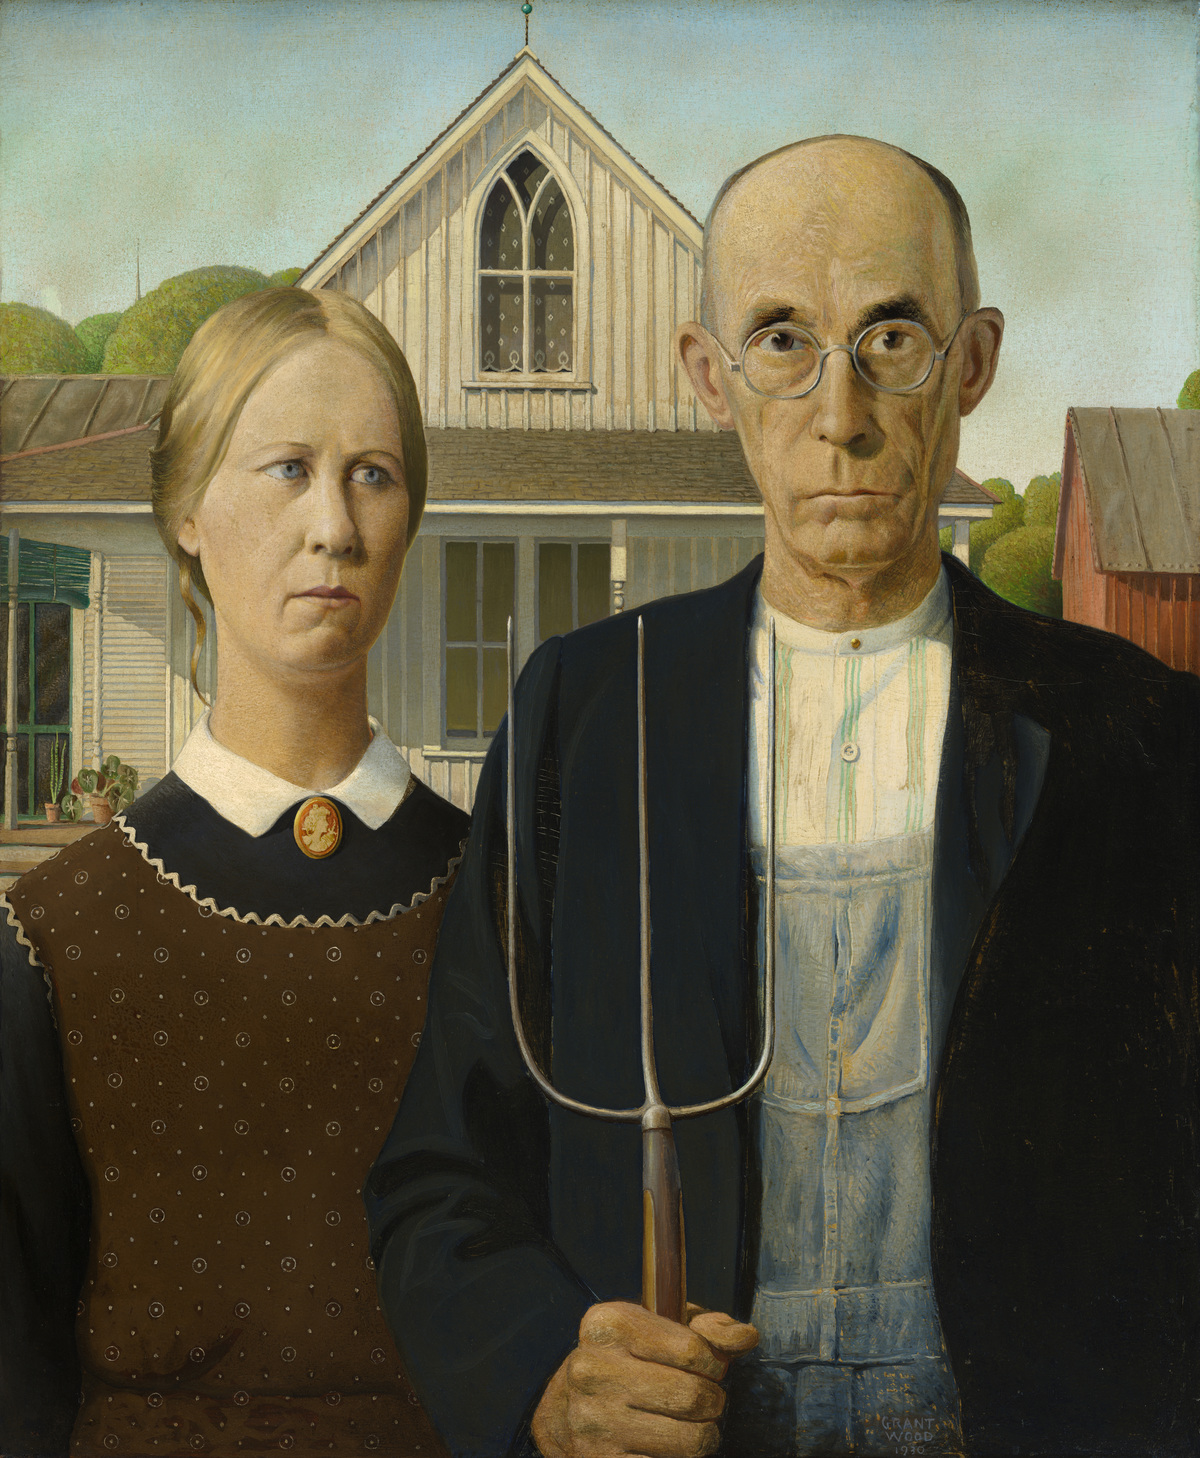 Grant Wood: American Gothic and Other Fables at the Whitney Museum